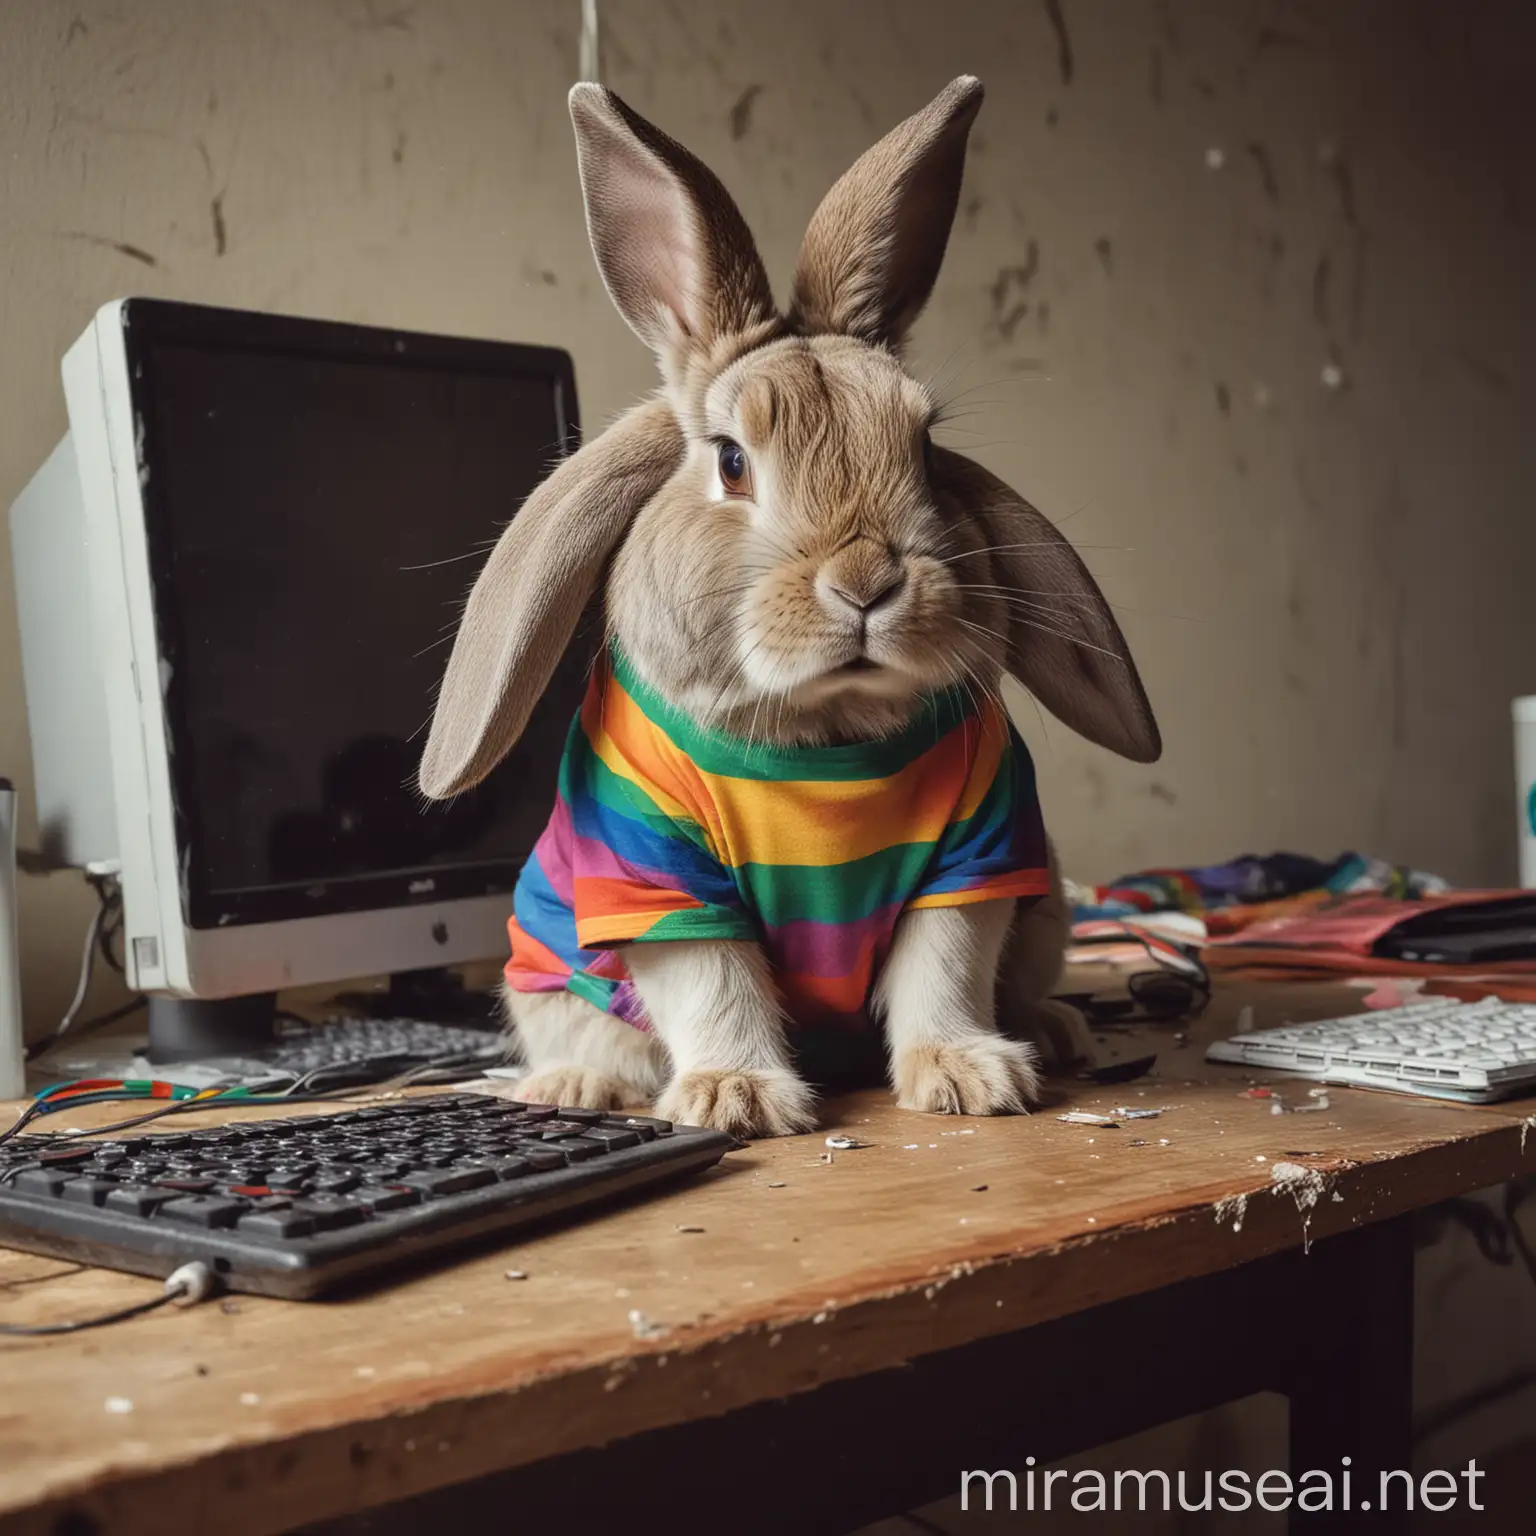 Sad Rabbit in Rainbow Shirt at Cluttered Desk